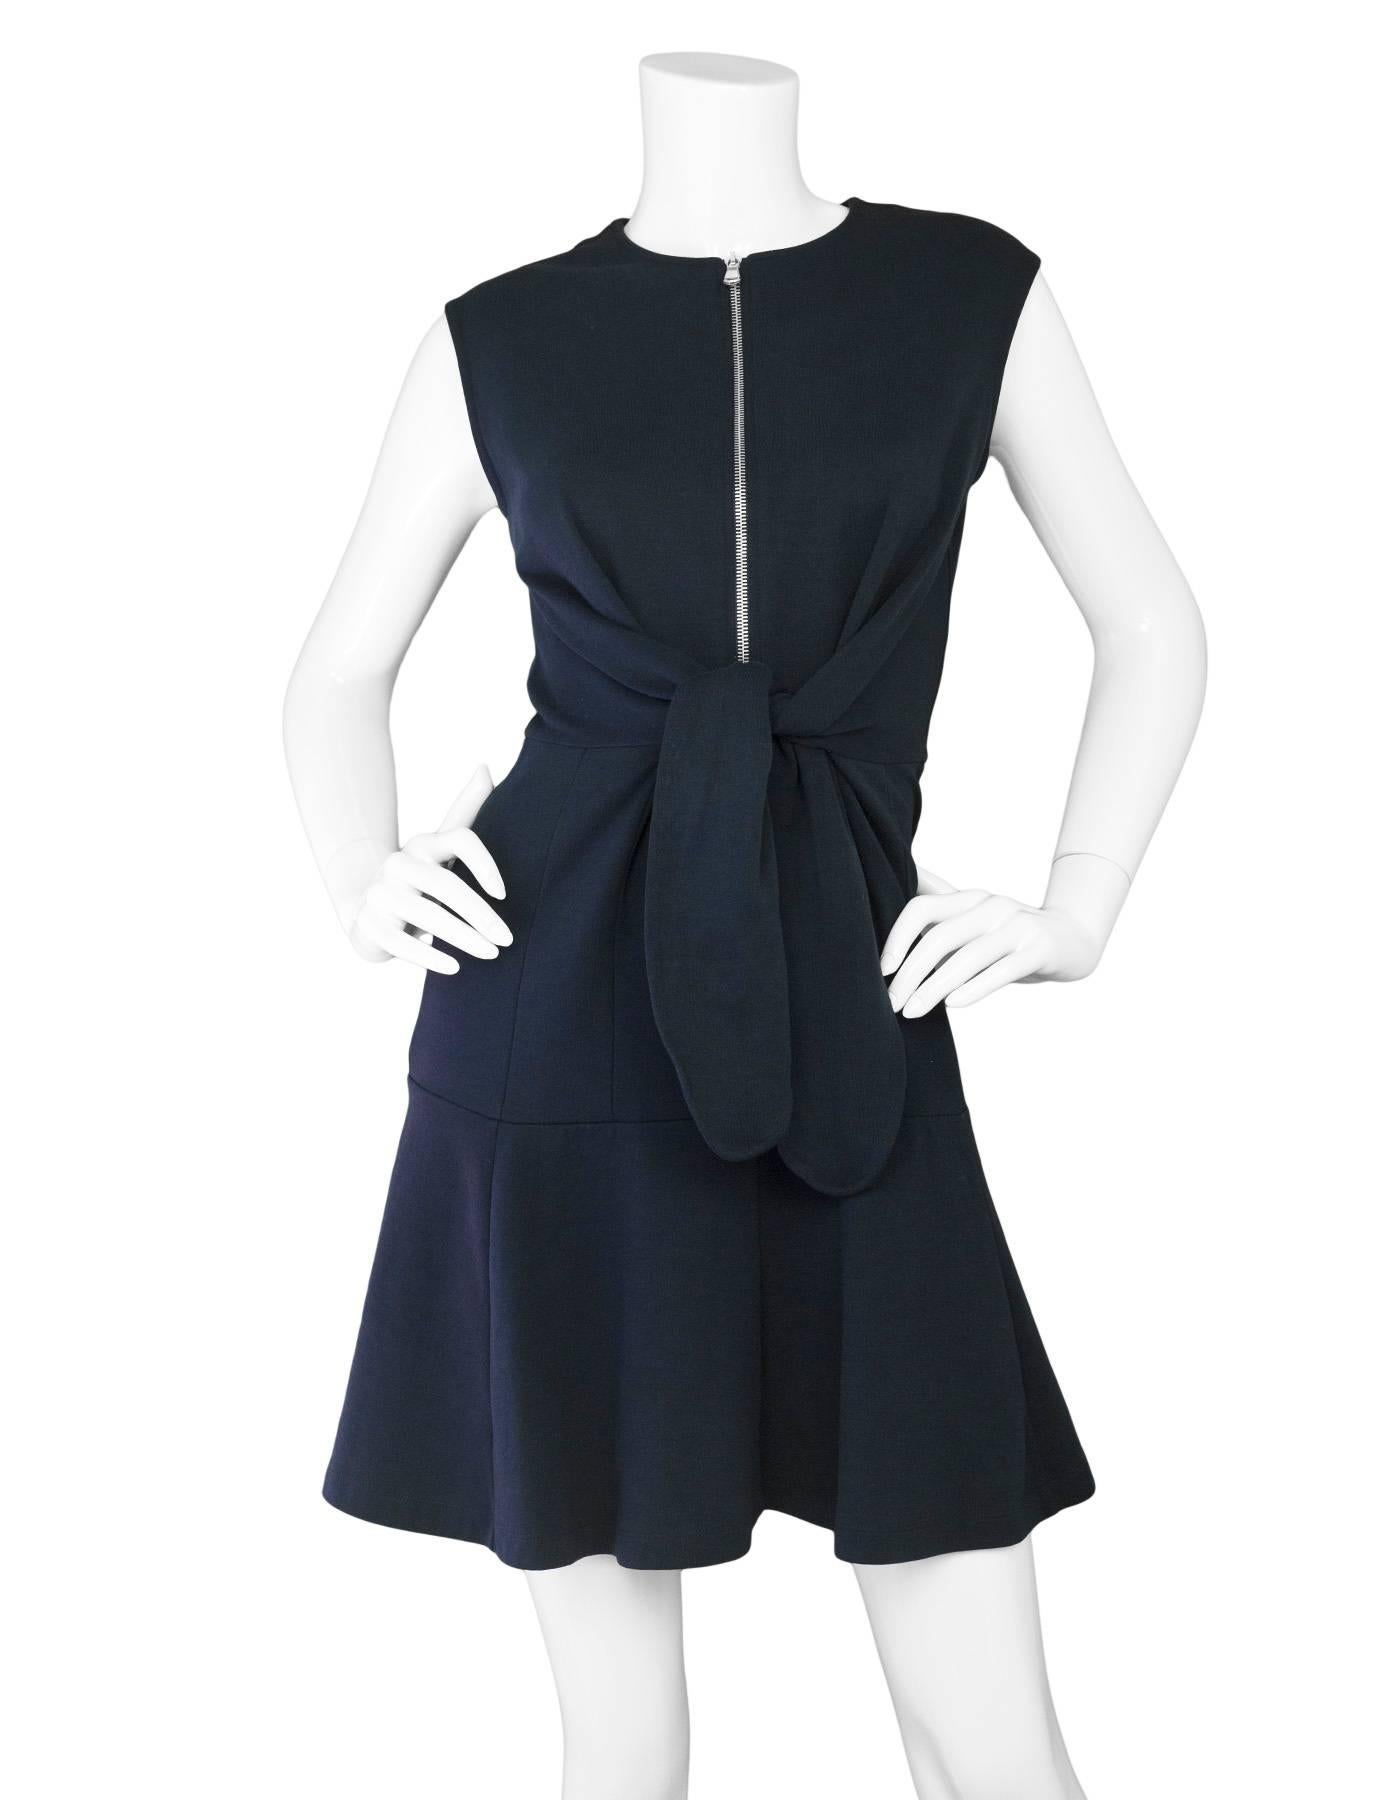 Carven Navy Sleeveless Zip Front Dress
Features Shirt Waist-Tie style front

Made In: Bulgaria
Color: Navy
Composition: 98% Cotton, 2% polyamide
Lining: None
Closure/Opening: Back center zip up and front zip up
Exterior Pockets: None
Interior